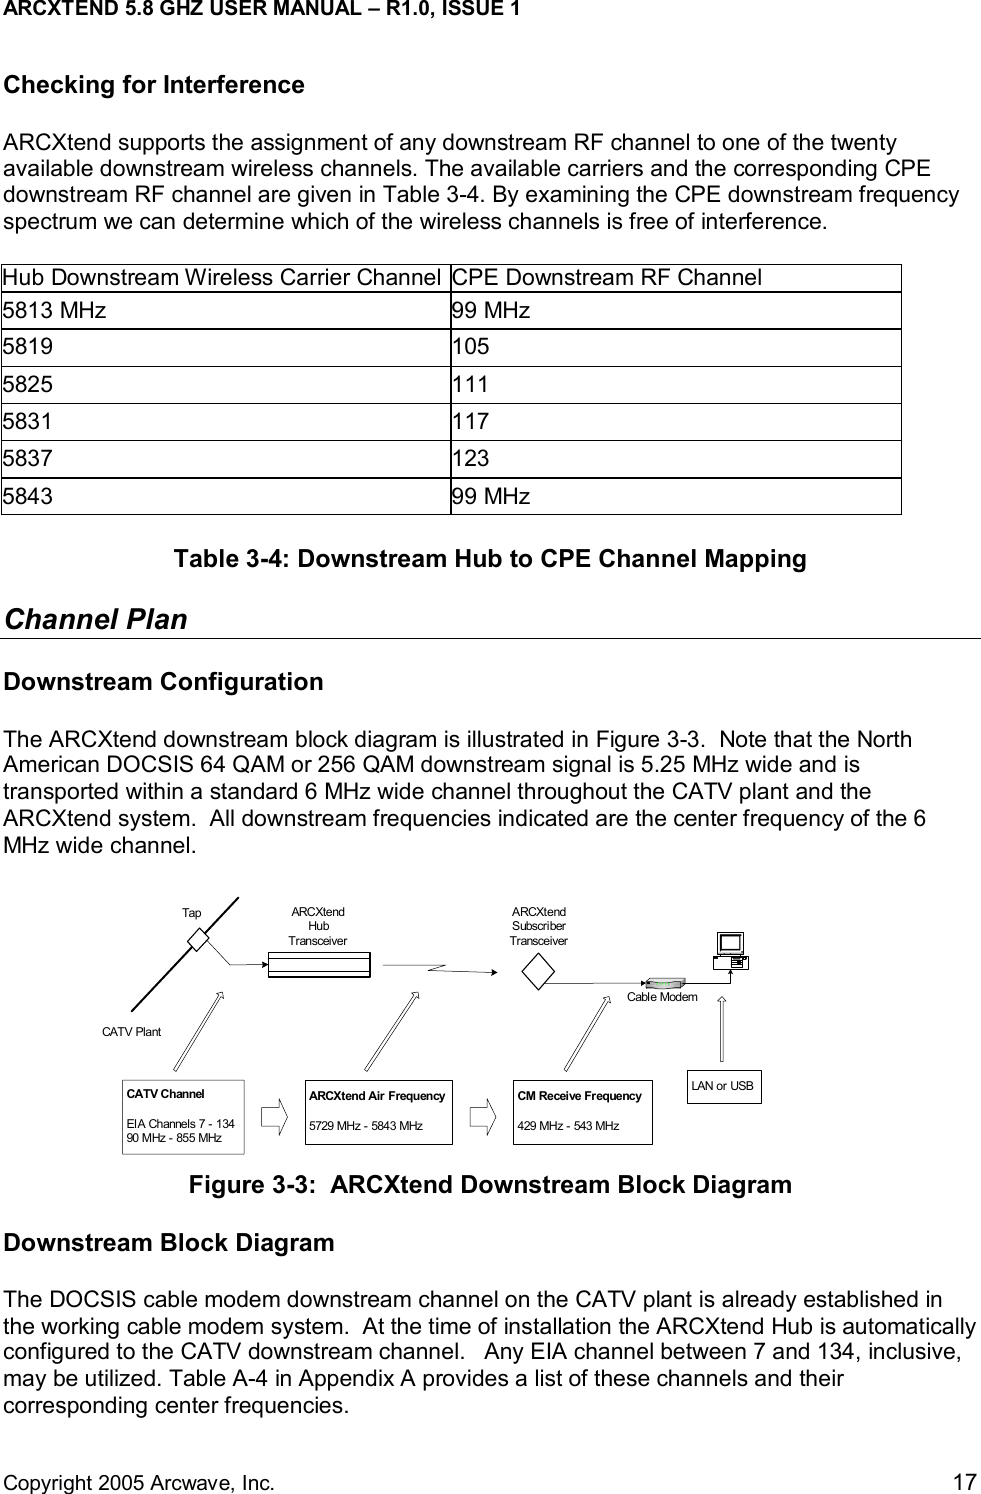 ARCXTEND 5.8 GHZ USER MANUAL – R1.0, ISSUE 1  Copyright 2005 Arcwave, Inc.    17 TapCATV PlantARCXtendSubscriberTransceiverCabl e ModemARCXtendHubTransceiverCATV ChannelEIA Channels 7 - 13490 MHz - 855 MHzARCXtend Air Frequency5729 MHz - 5843 MHzCM Receive Frequency429 MHz - 543 MHzLAN or USBChecking for Interference ARCXtend supports the assignment of any downstream RF channel to one of the twenty available downstream wireless channels. The available carriers and the corresponding CPE downstream RF channel are given in Table 3-4. By examining the CPE downstream frequency spectrum we can determine which of the wireless channels is free of interference.   Hub Downstream Wireless Carrier Channel CPE Downstream RF Channel  5813 MHz  99 MHz 5819   105 5825   111 5831   117 5837   123 5843   99 MHz Table 3-4: Downstream Hub to CPE Channel Mapping Channel Plan Downstream Configuration The ARCXtend downstream block diagram is illustrated in Figure 3-3.  Note that the North American DOCSIS 64 QAM or 256 QAM downstream signal is 5.25 MHz wide and is transported within a standard 6 MHz wide channel throughout the CATV plant and the ARCXtend system.  All downstream frequencies indicated are the center frequency of the 6 MHz wide channel. Figure 3-3:  ARCXtend Downstream Block Diagram Downstream Block Diagram The DOCSIS cable modem downstream channel on the CATV plant is already established in the working cable modem system.  At the time of installation the ARCXtend Hub is automatically configured to the CATV downstream channel.   Any EIA channel between 7 and 134, inclusive, may be utilized. Table A-4 in Appendix A provides a list of these channels and their corresponding center frequencies. 